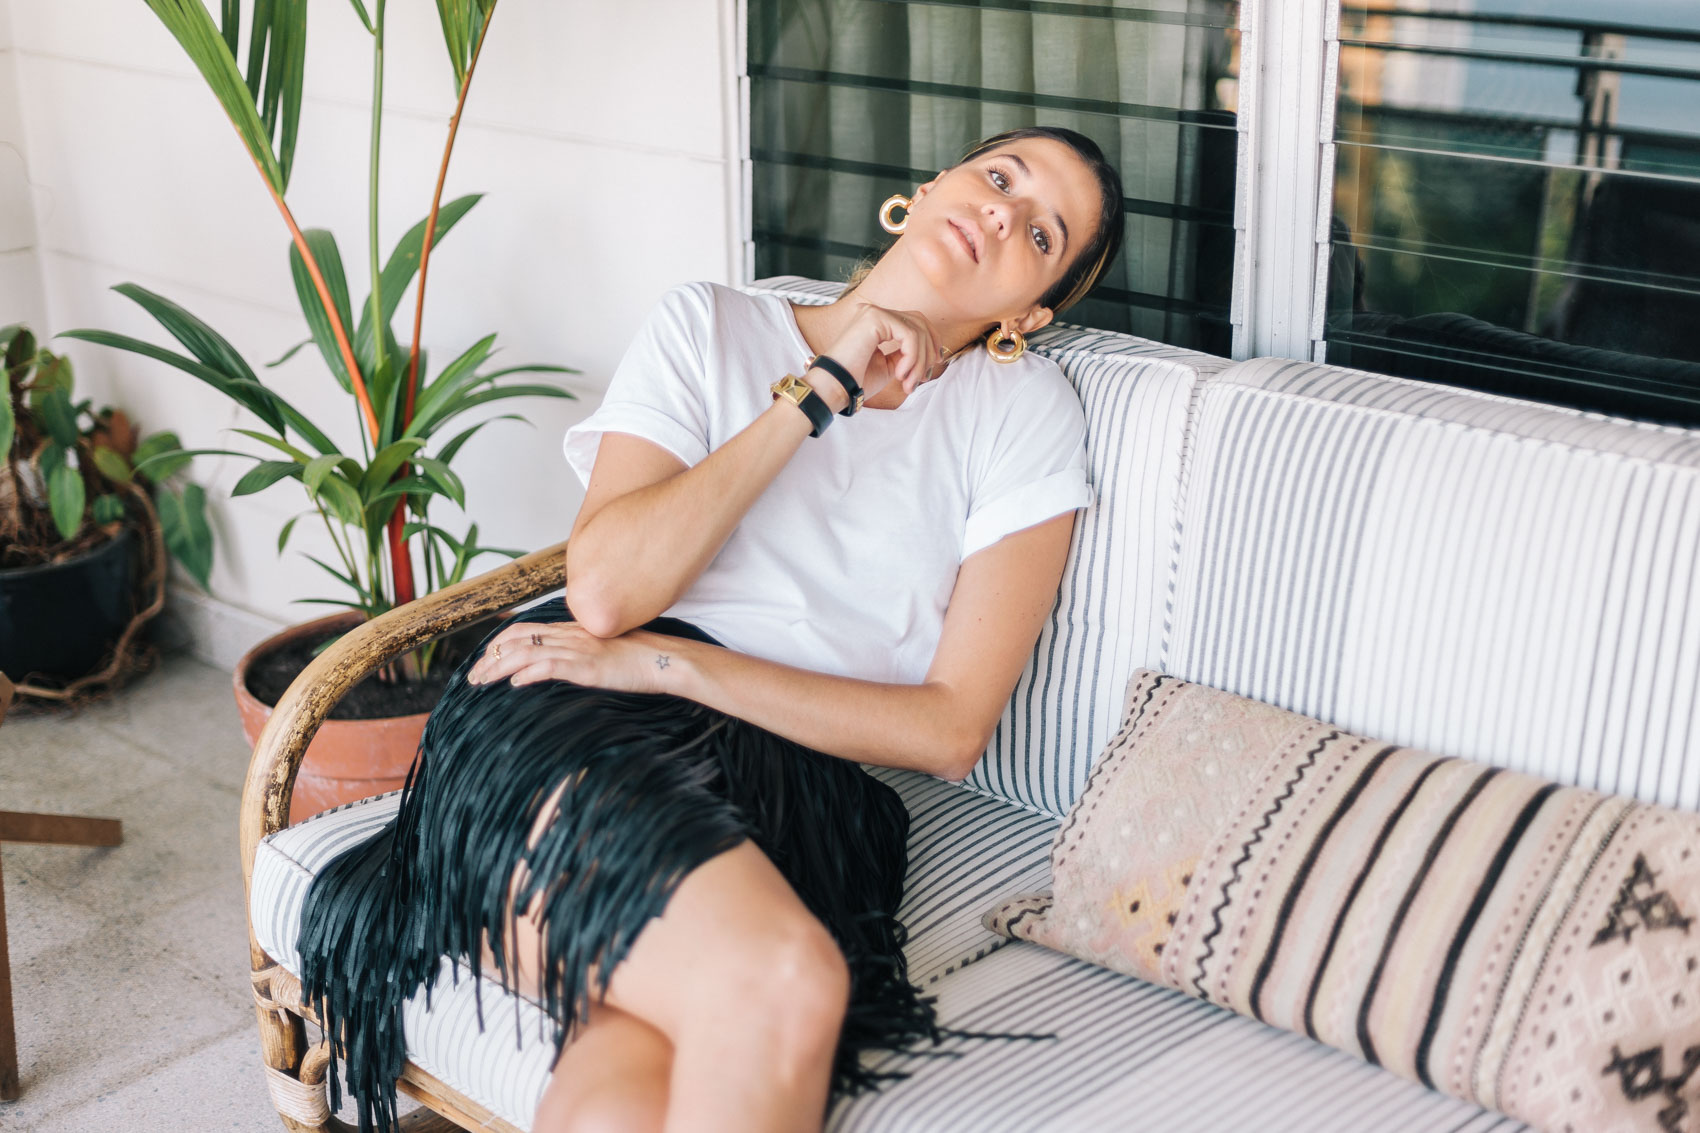 Maristella in her terrace patio, sitting on a rattan sofa, wearing a white tee from Cheap Monday with a leather mini skirt with fringe, leather bracelets with gold hardware from Yves Saint Laurent